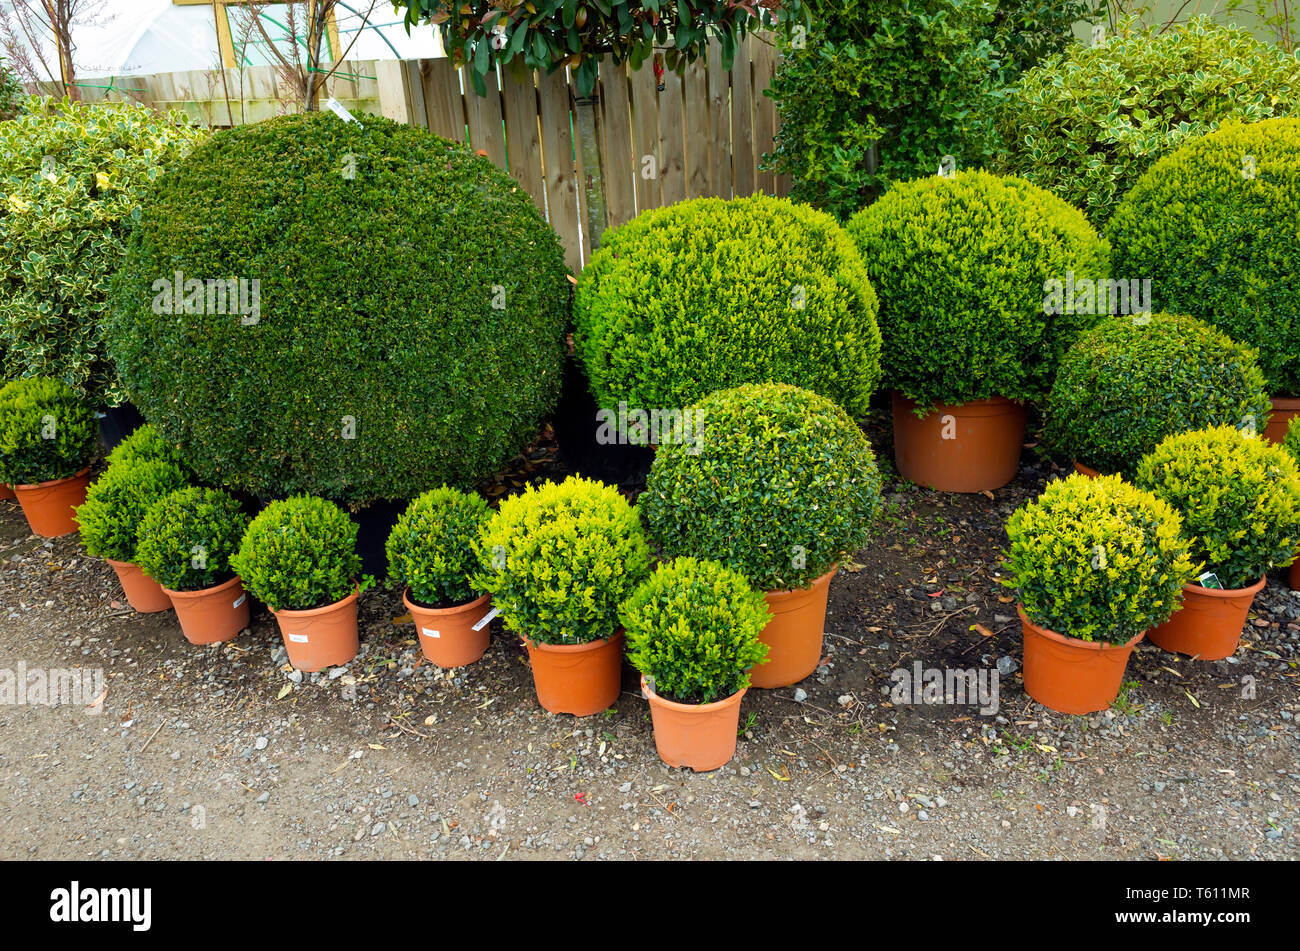 Buxus Ball Potted Box Bushes Feature Plants For Sale In A Durham